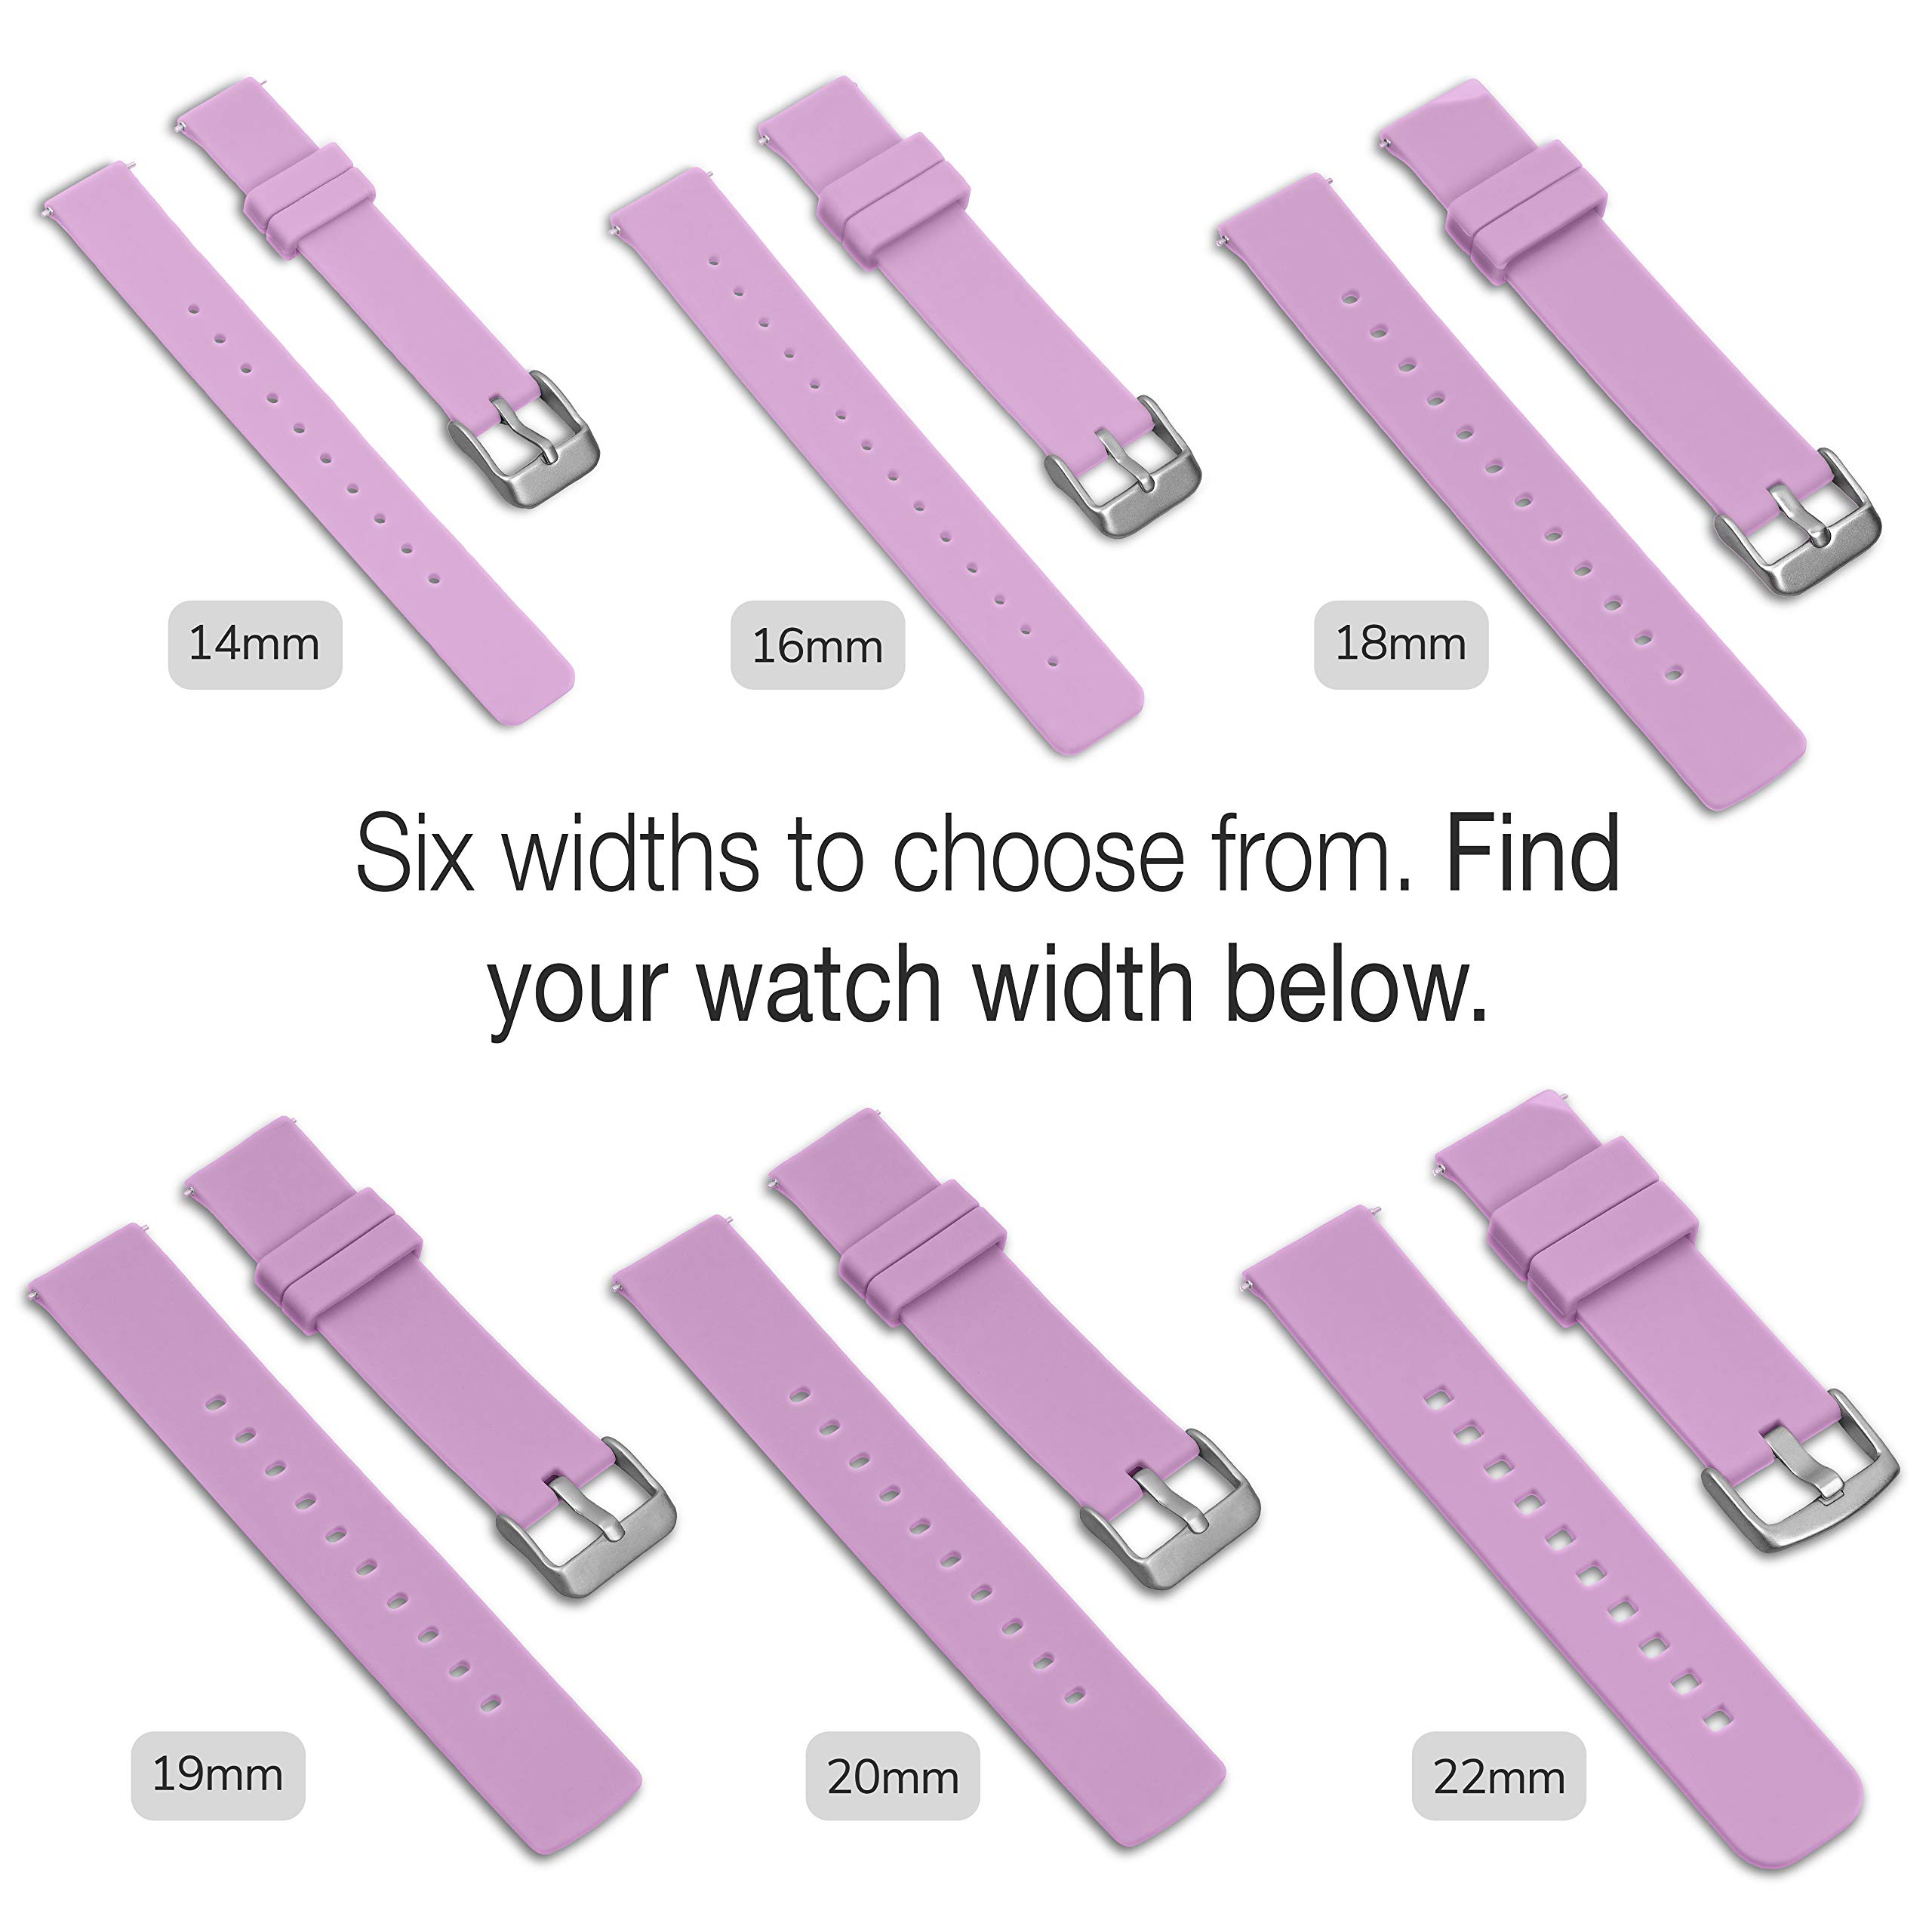 GadgetWraps 16mm Silicone Watch Band Strap with Quick Release Pins – Compatible with Fossil, Skagen, Misfit - 16mm Quick Release Watch Band (Purple Glow, 16mm)